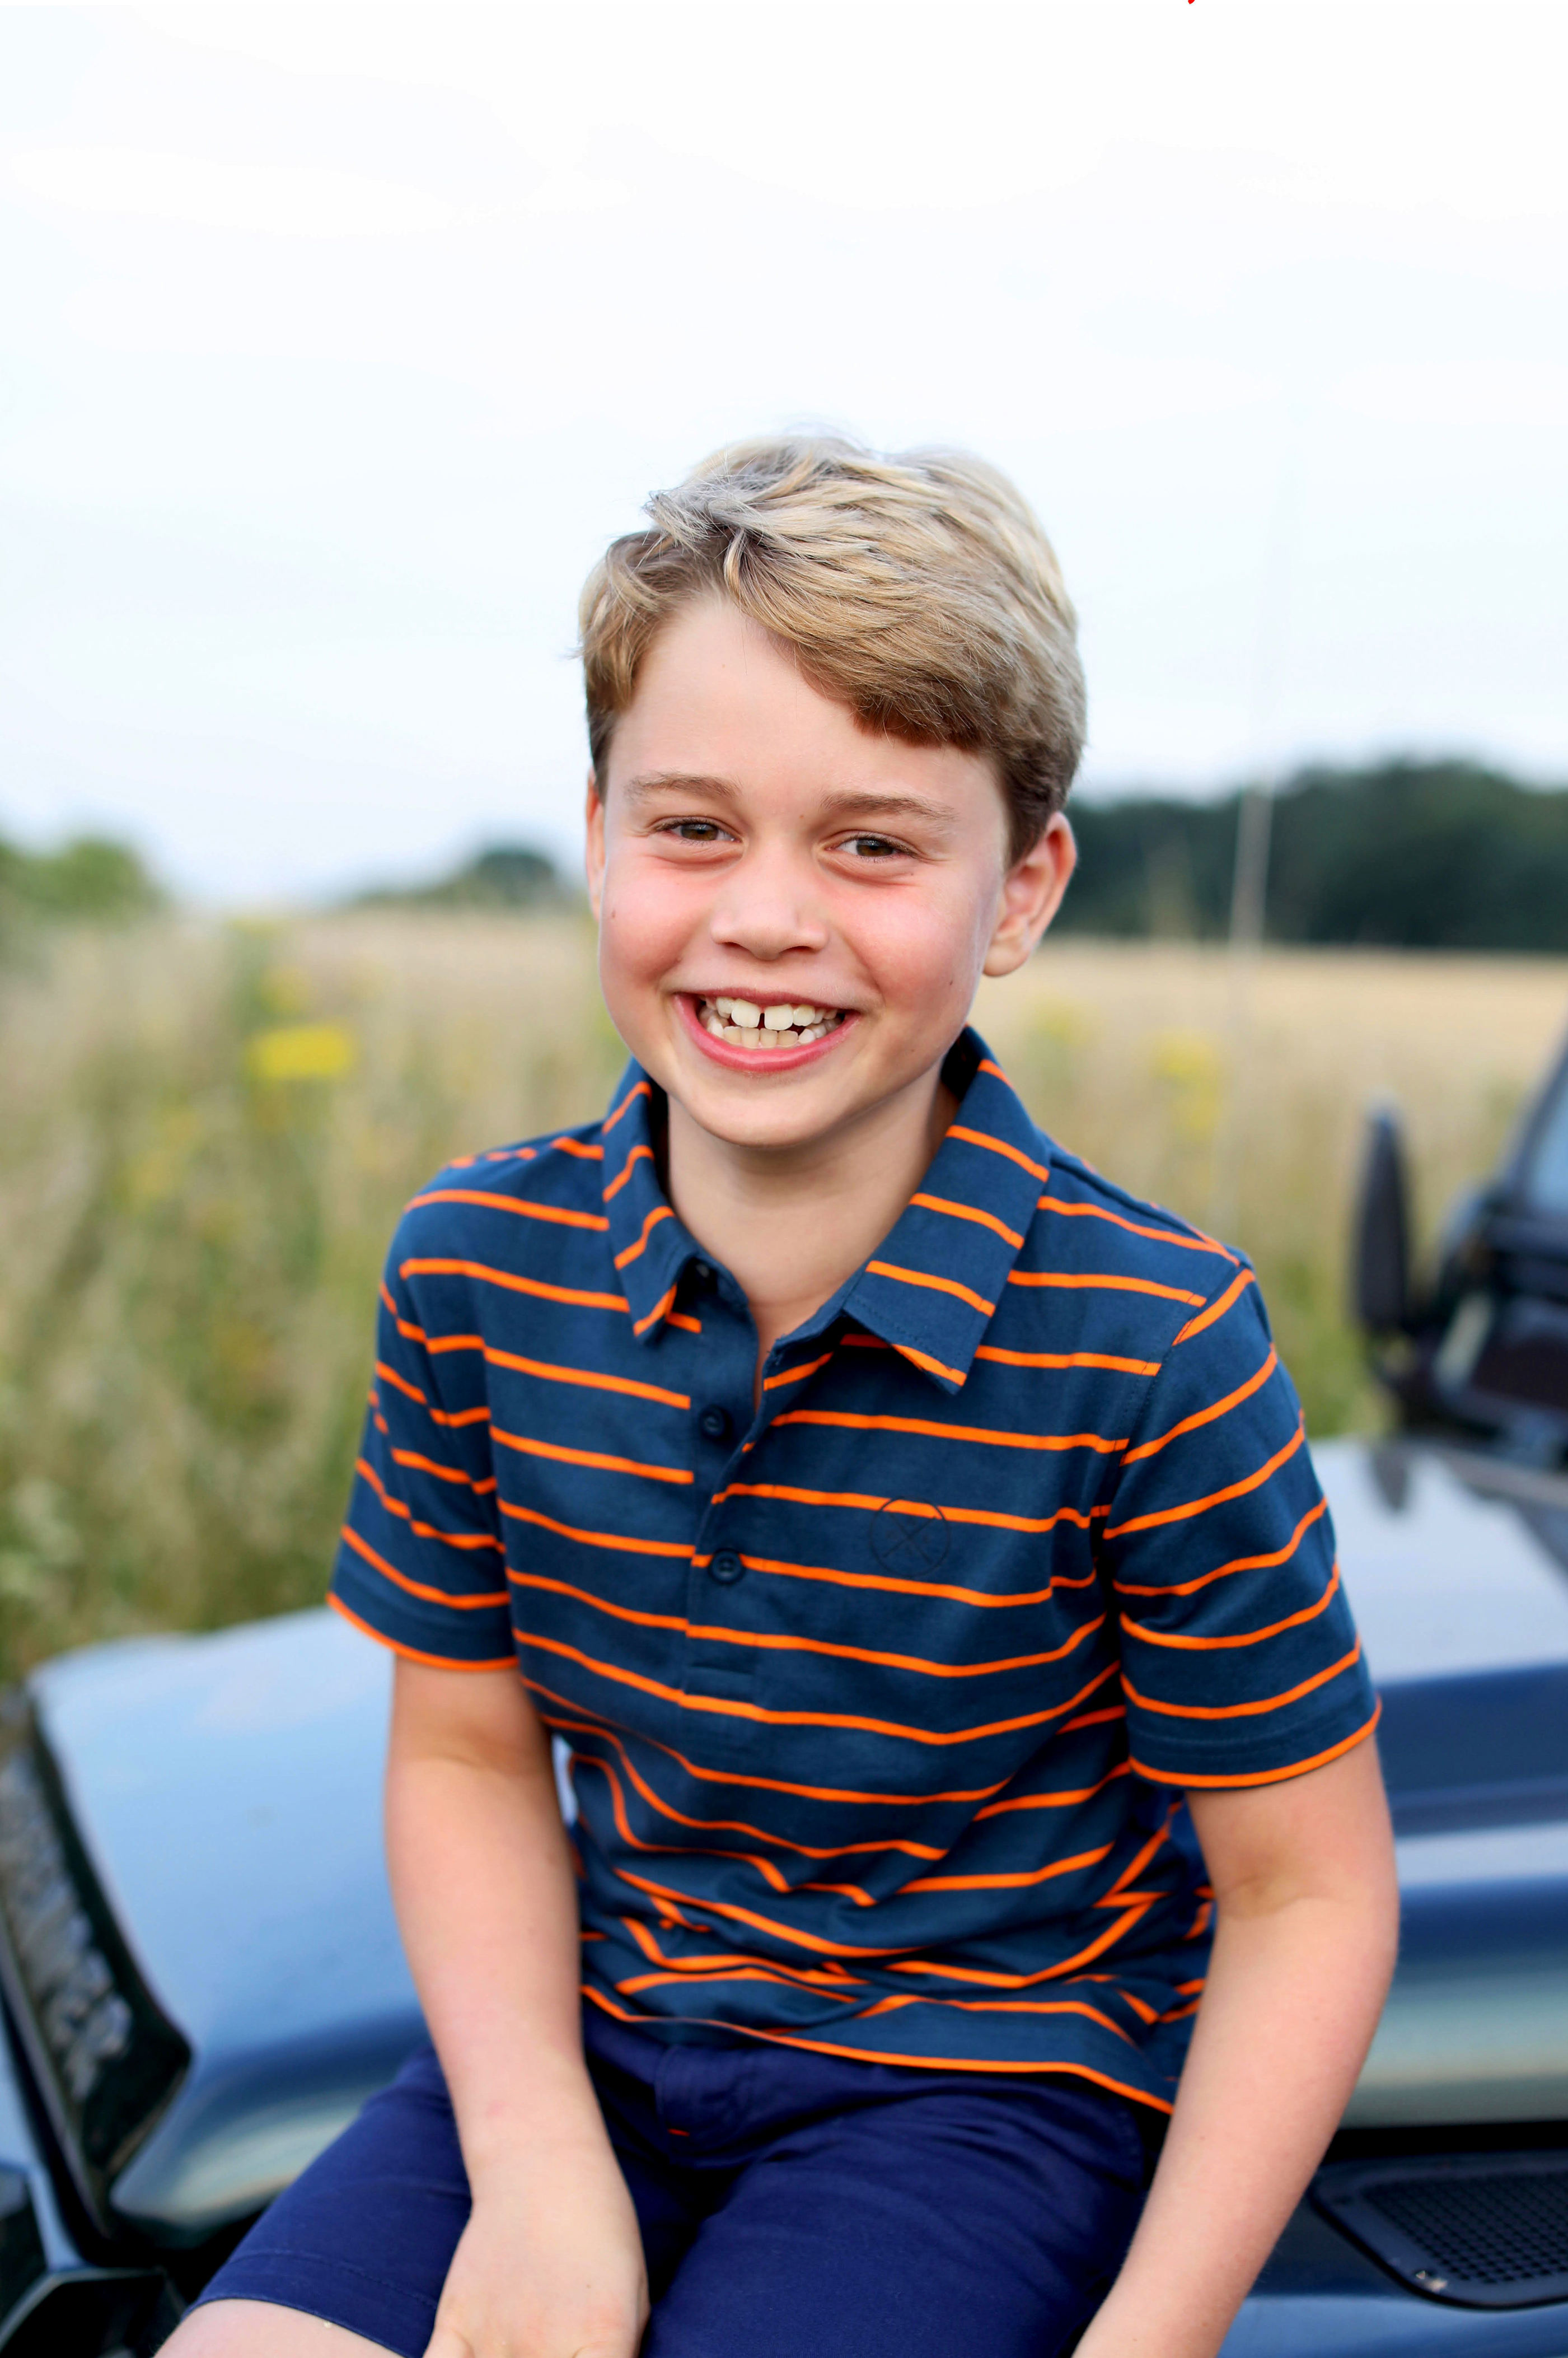 <p>Prince George posed for this, photo which was taken by his mother <a href="https://www.wonderwall.com/celebrity/profiles/overview/duchess-kate-1356.article">Duchess Kate</a> in Norfolk, England, in July 2021 to mark the occasion of his 8th birthday on July 22, 2021. </p>